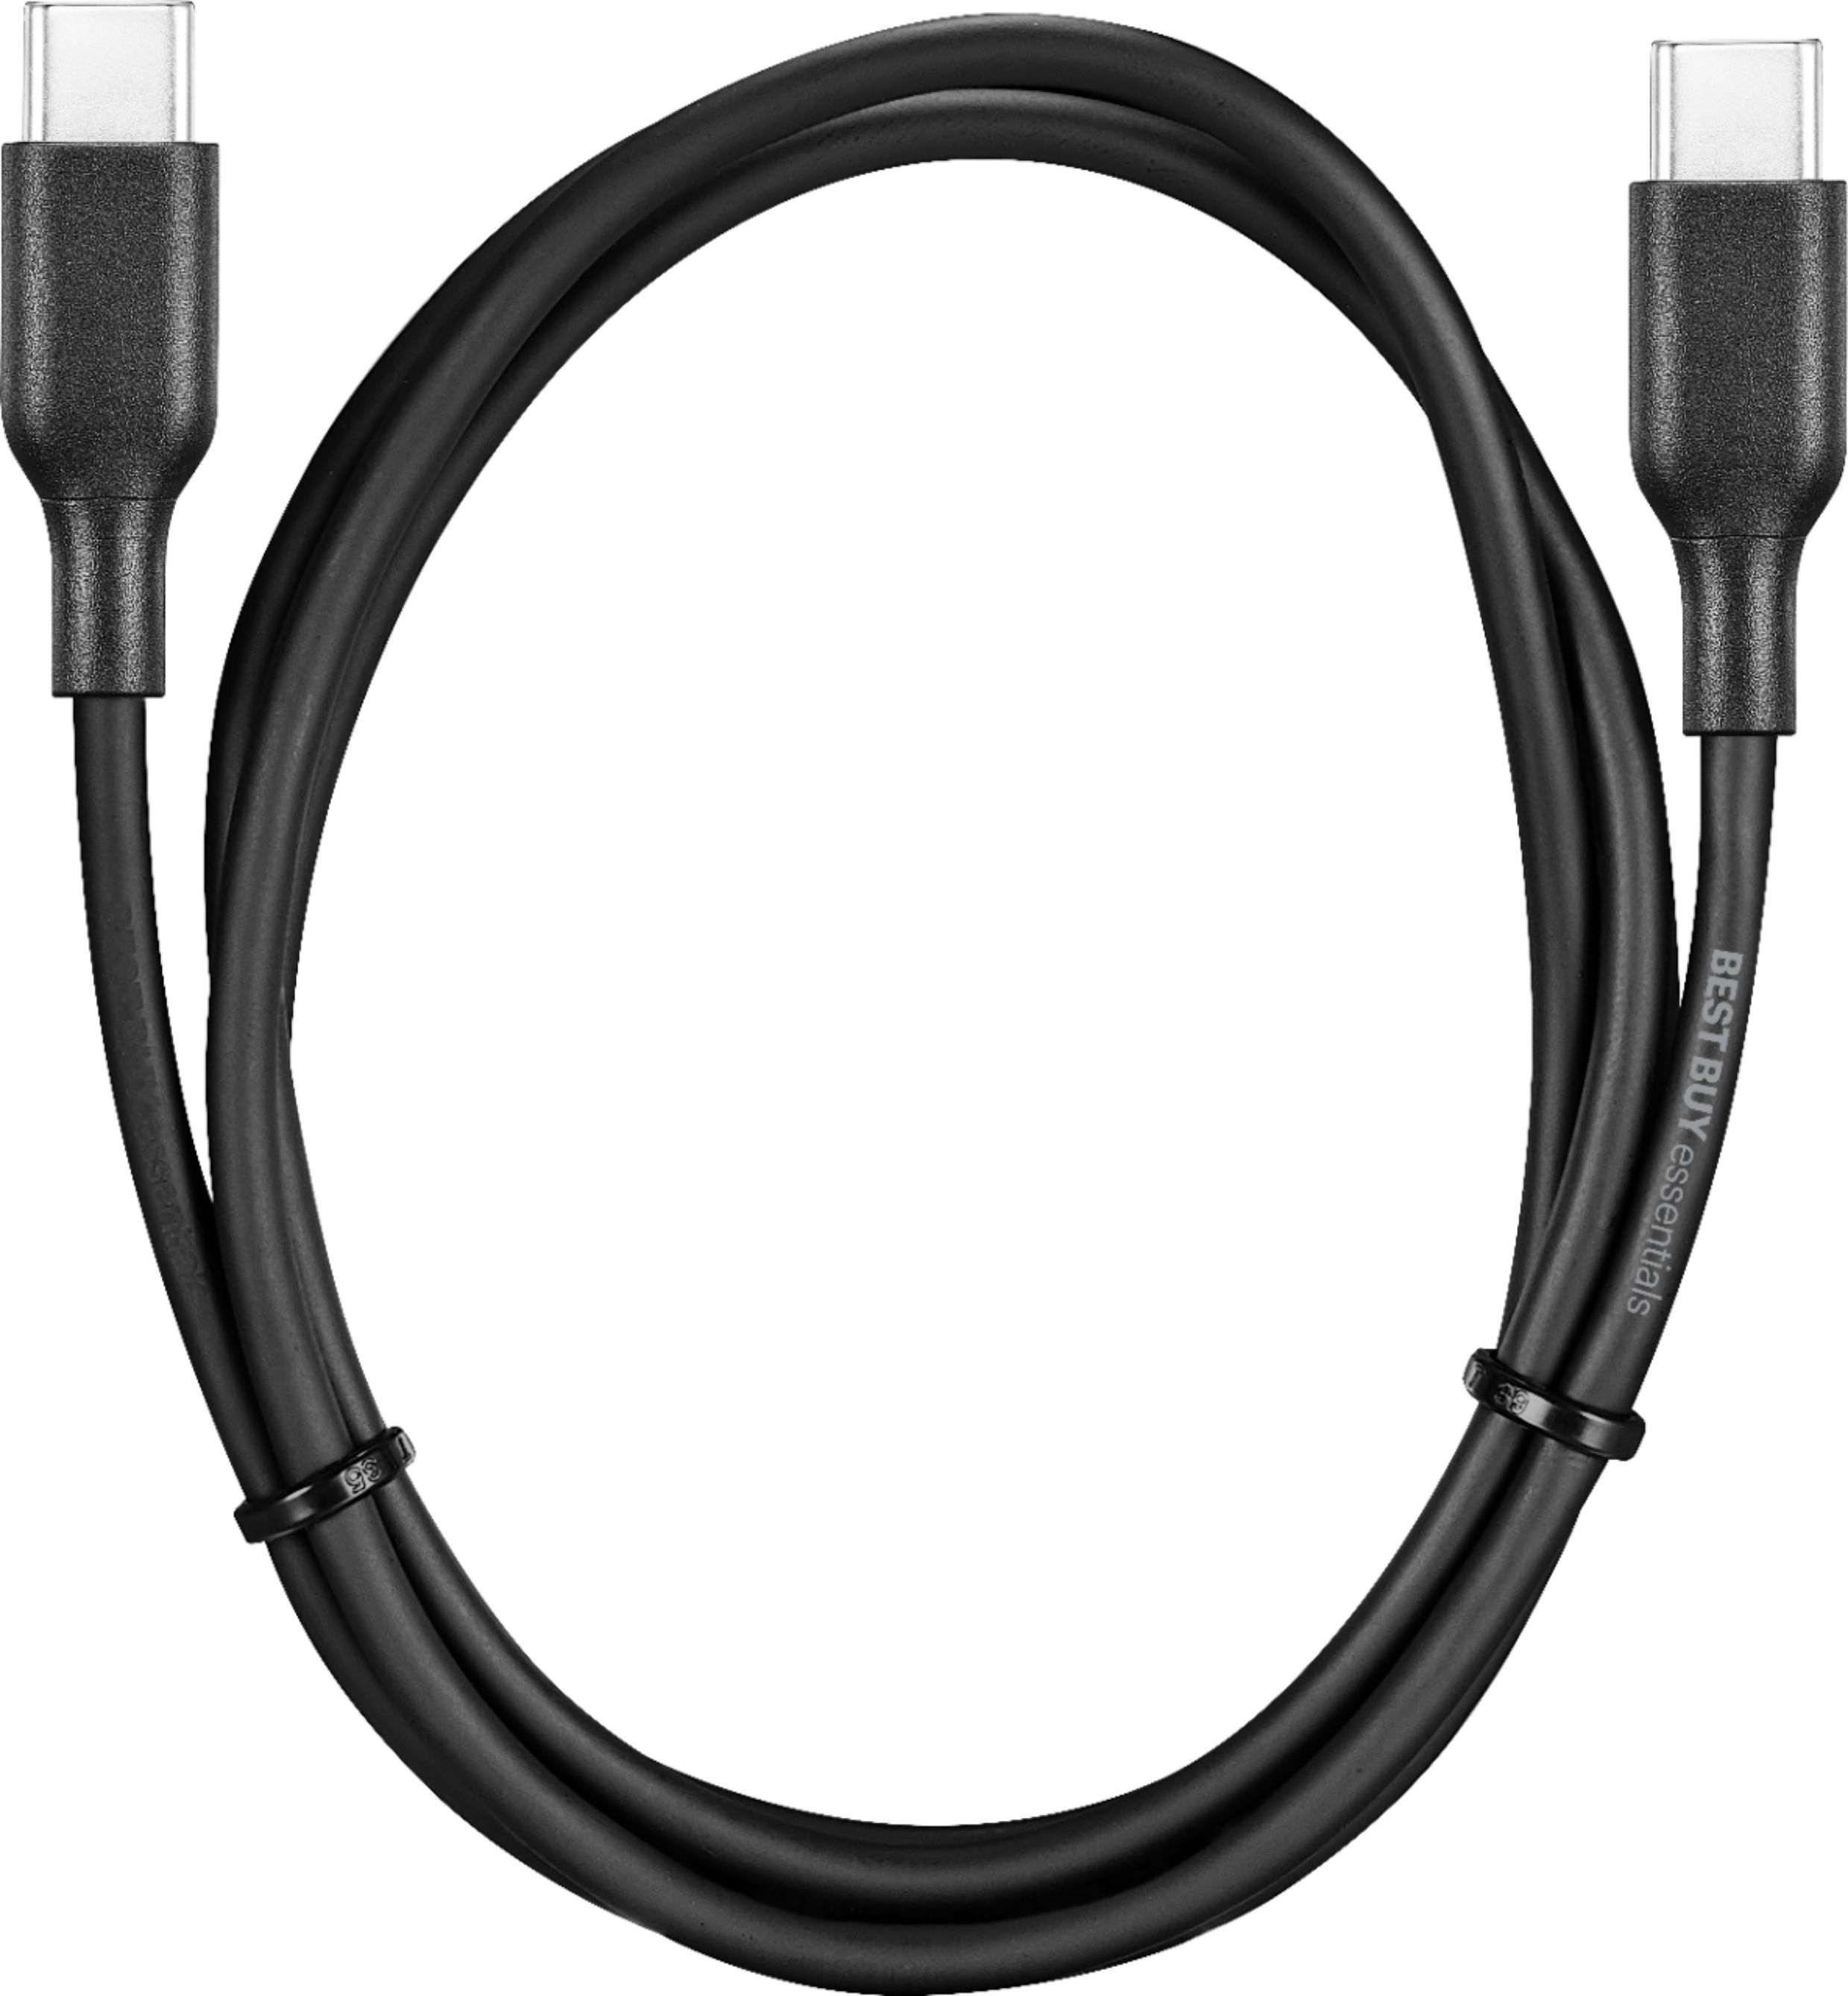 Casey's USB-C Cable 3ft - Order Online for Delivery or Pickup